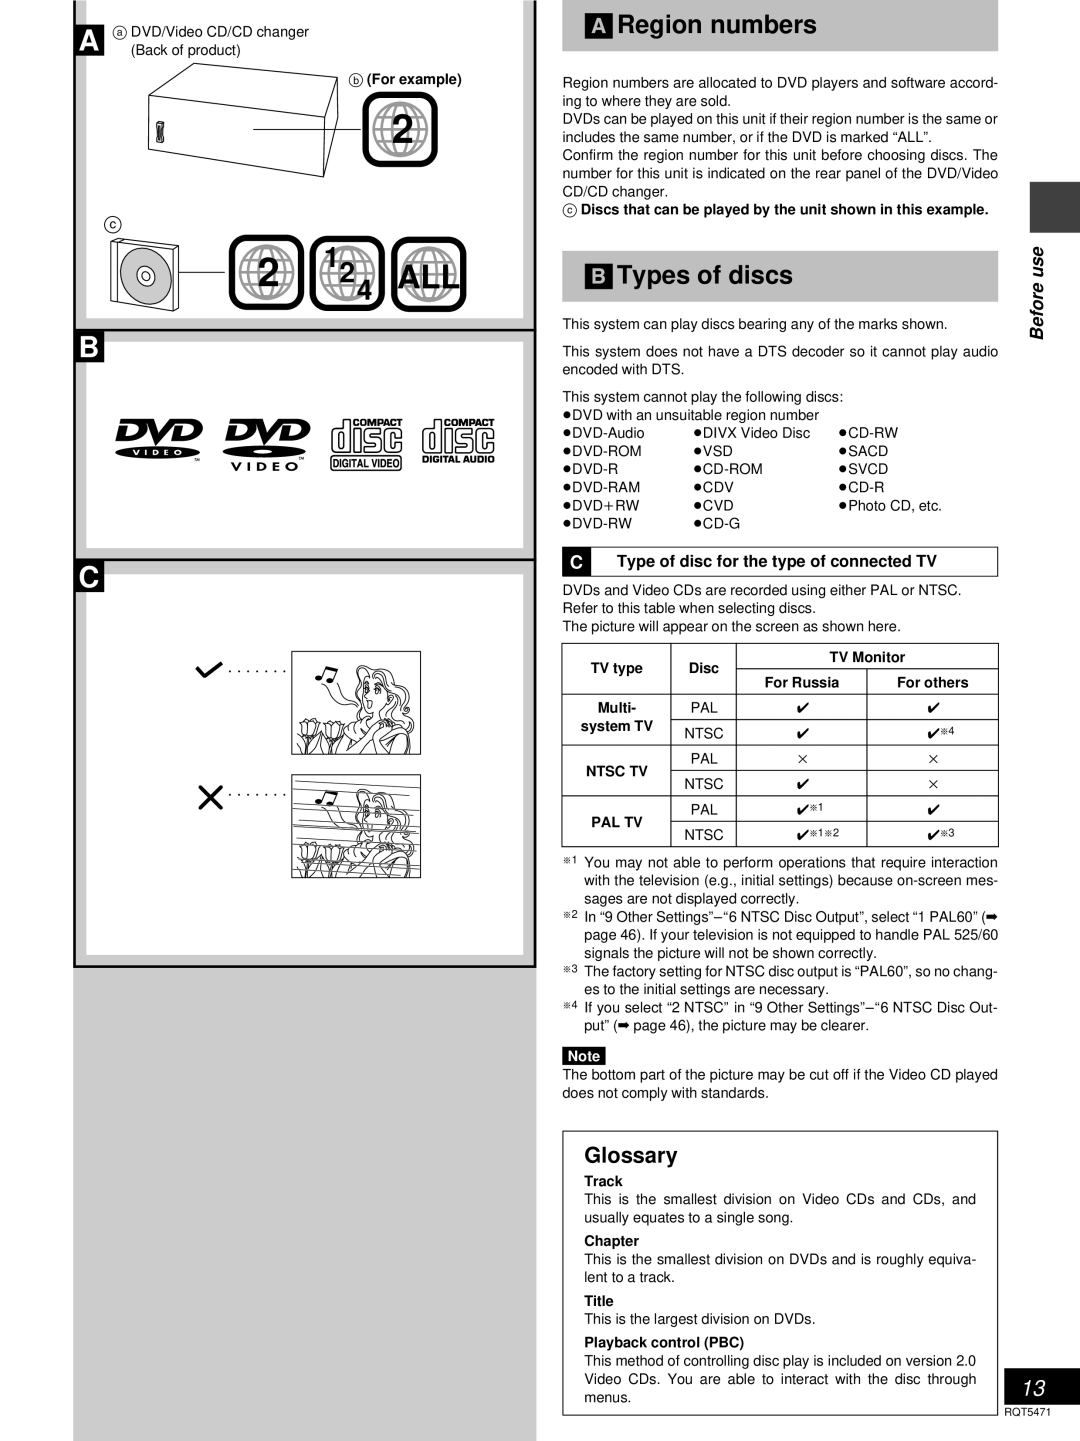 Technics SC-DV170 manual 2 124 ALL, A Region numbers, B Types of discs, Glossary, Type of disc for the type of connected TV 